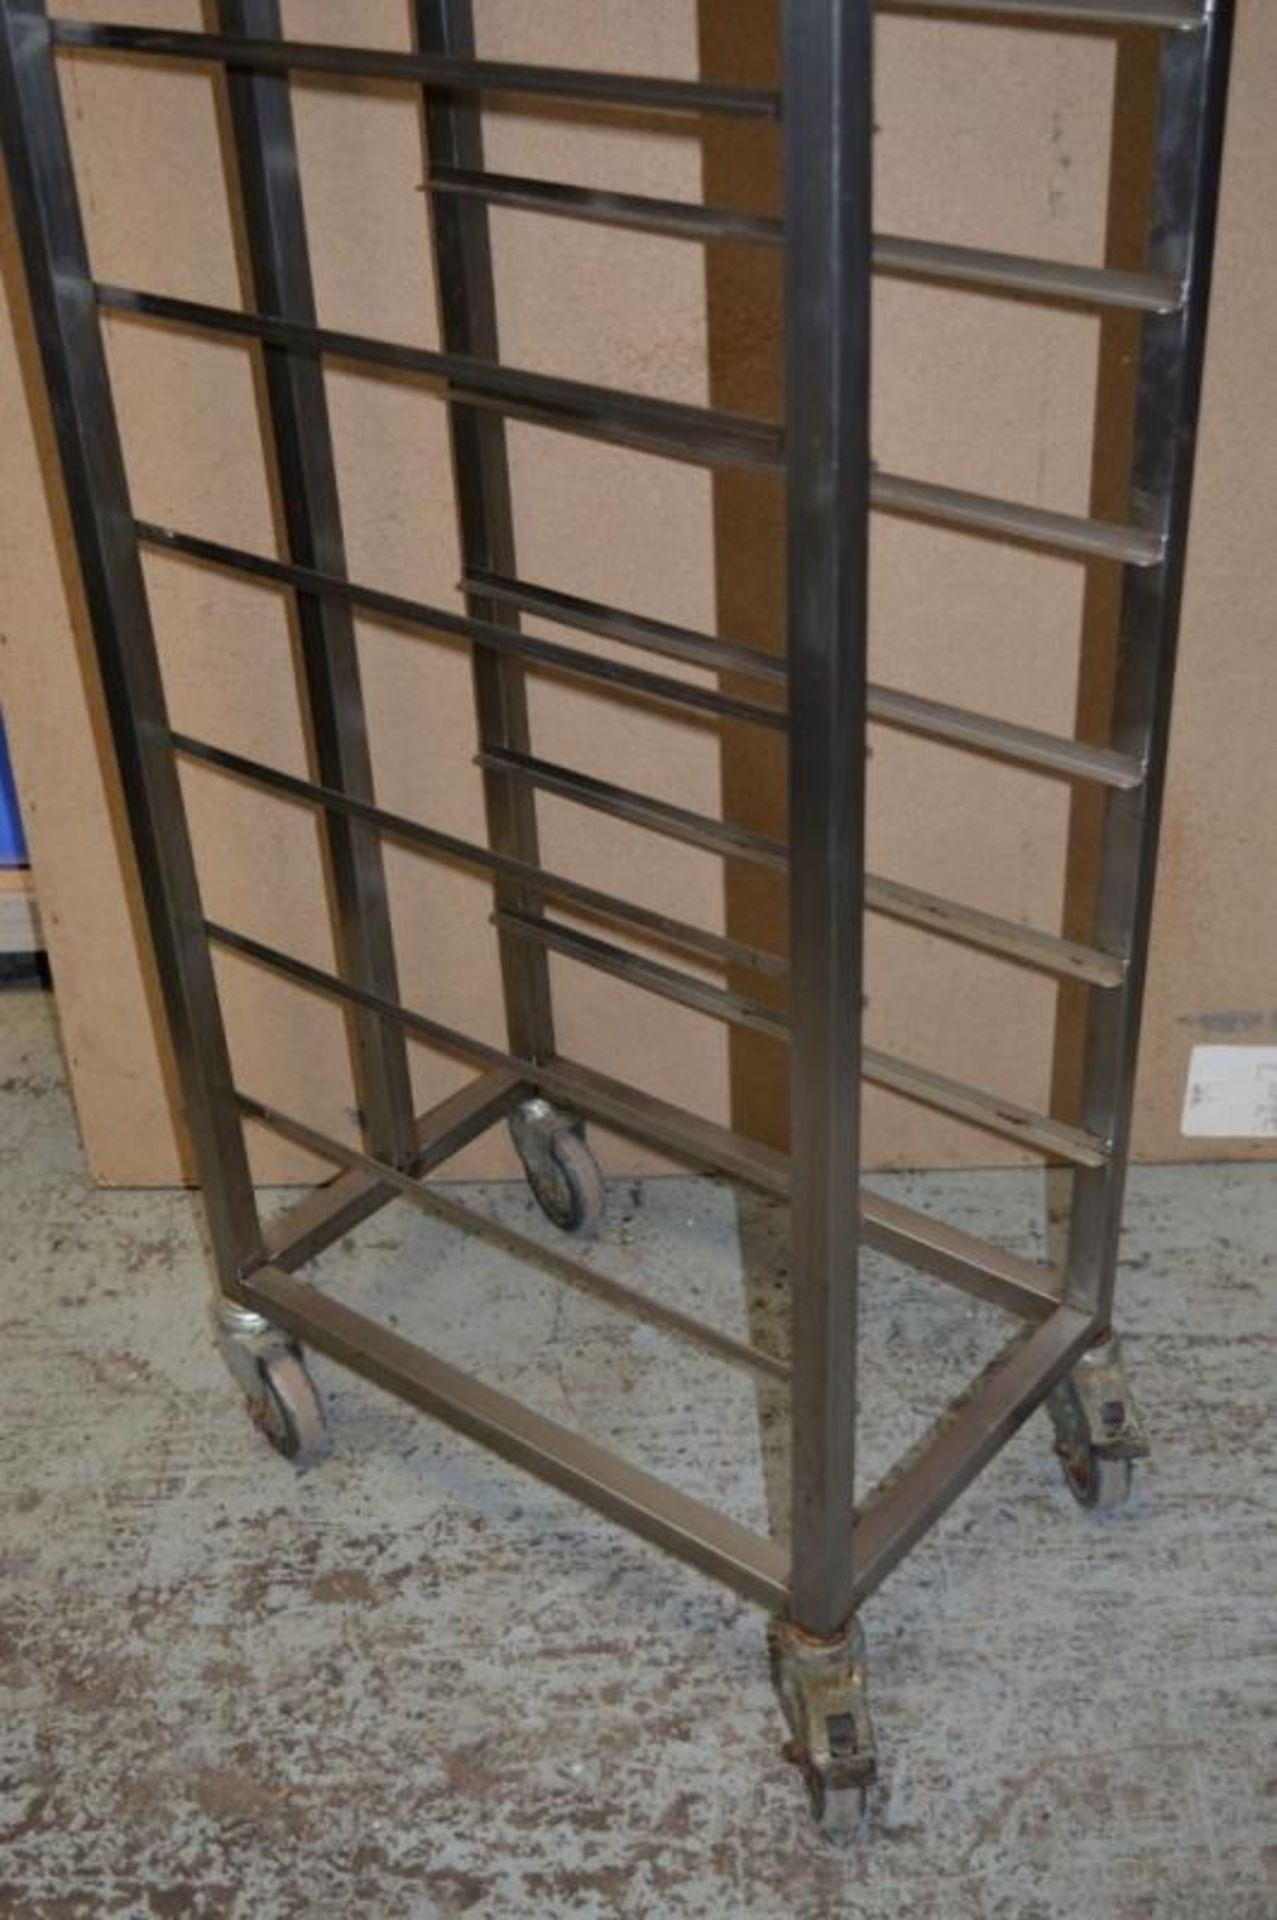 1 x Stainless Steel 10 Tier Pan and Tray Rack - CL232 - H179 x W39 x D65.5 cms - Ref JP246 - Locatio - Image 3 of 5